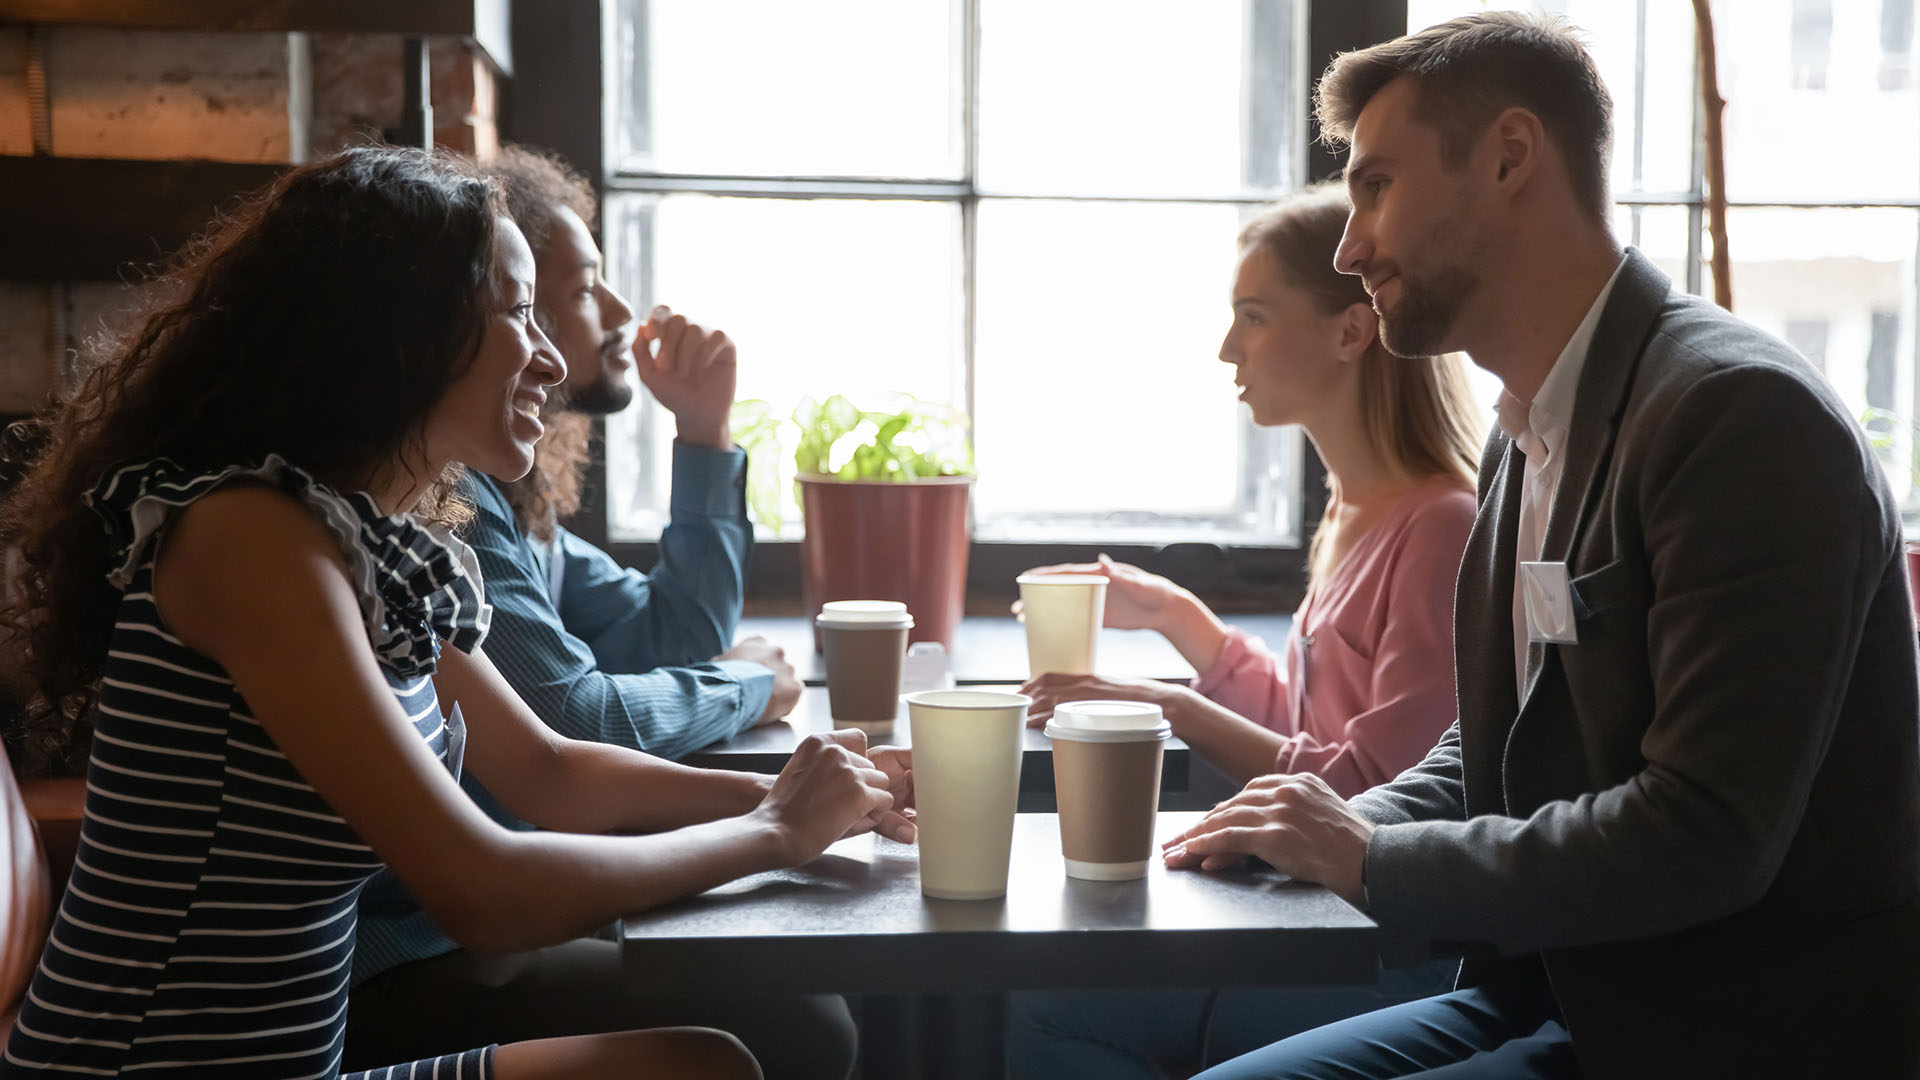 Two men and two women sitting next to each other at a cafe with coffees in front of them, conversing with each other.